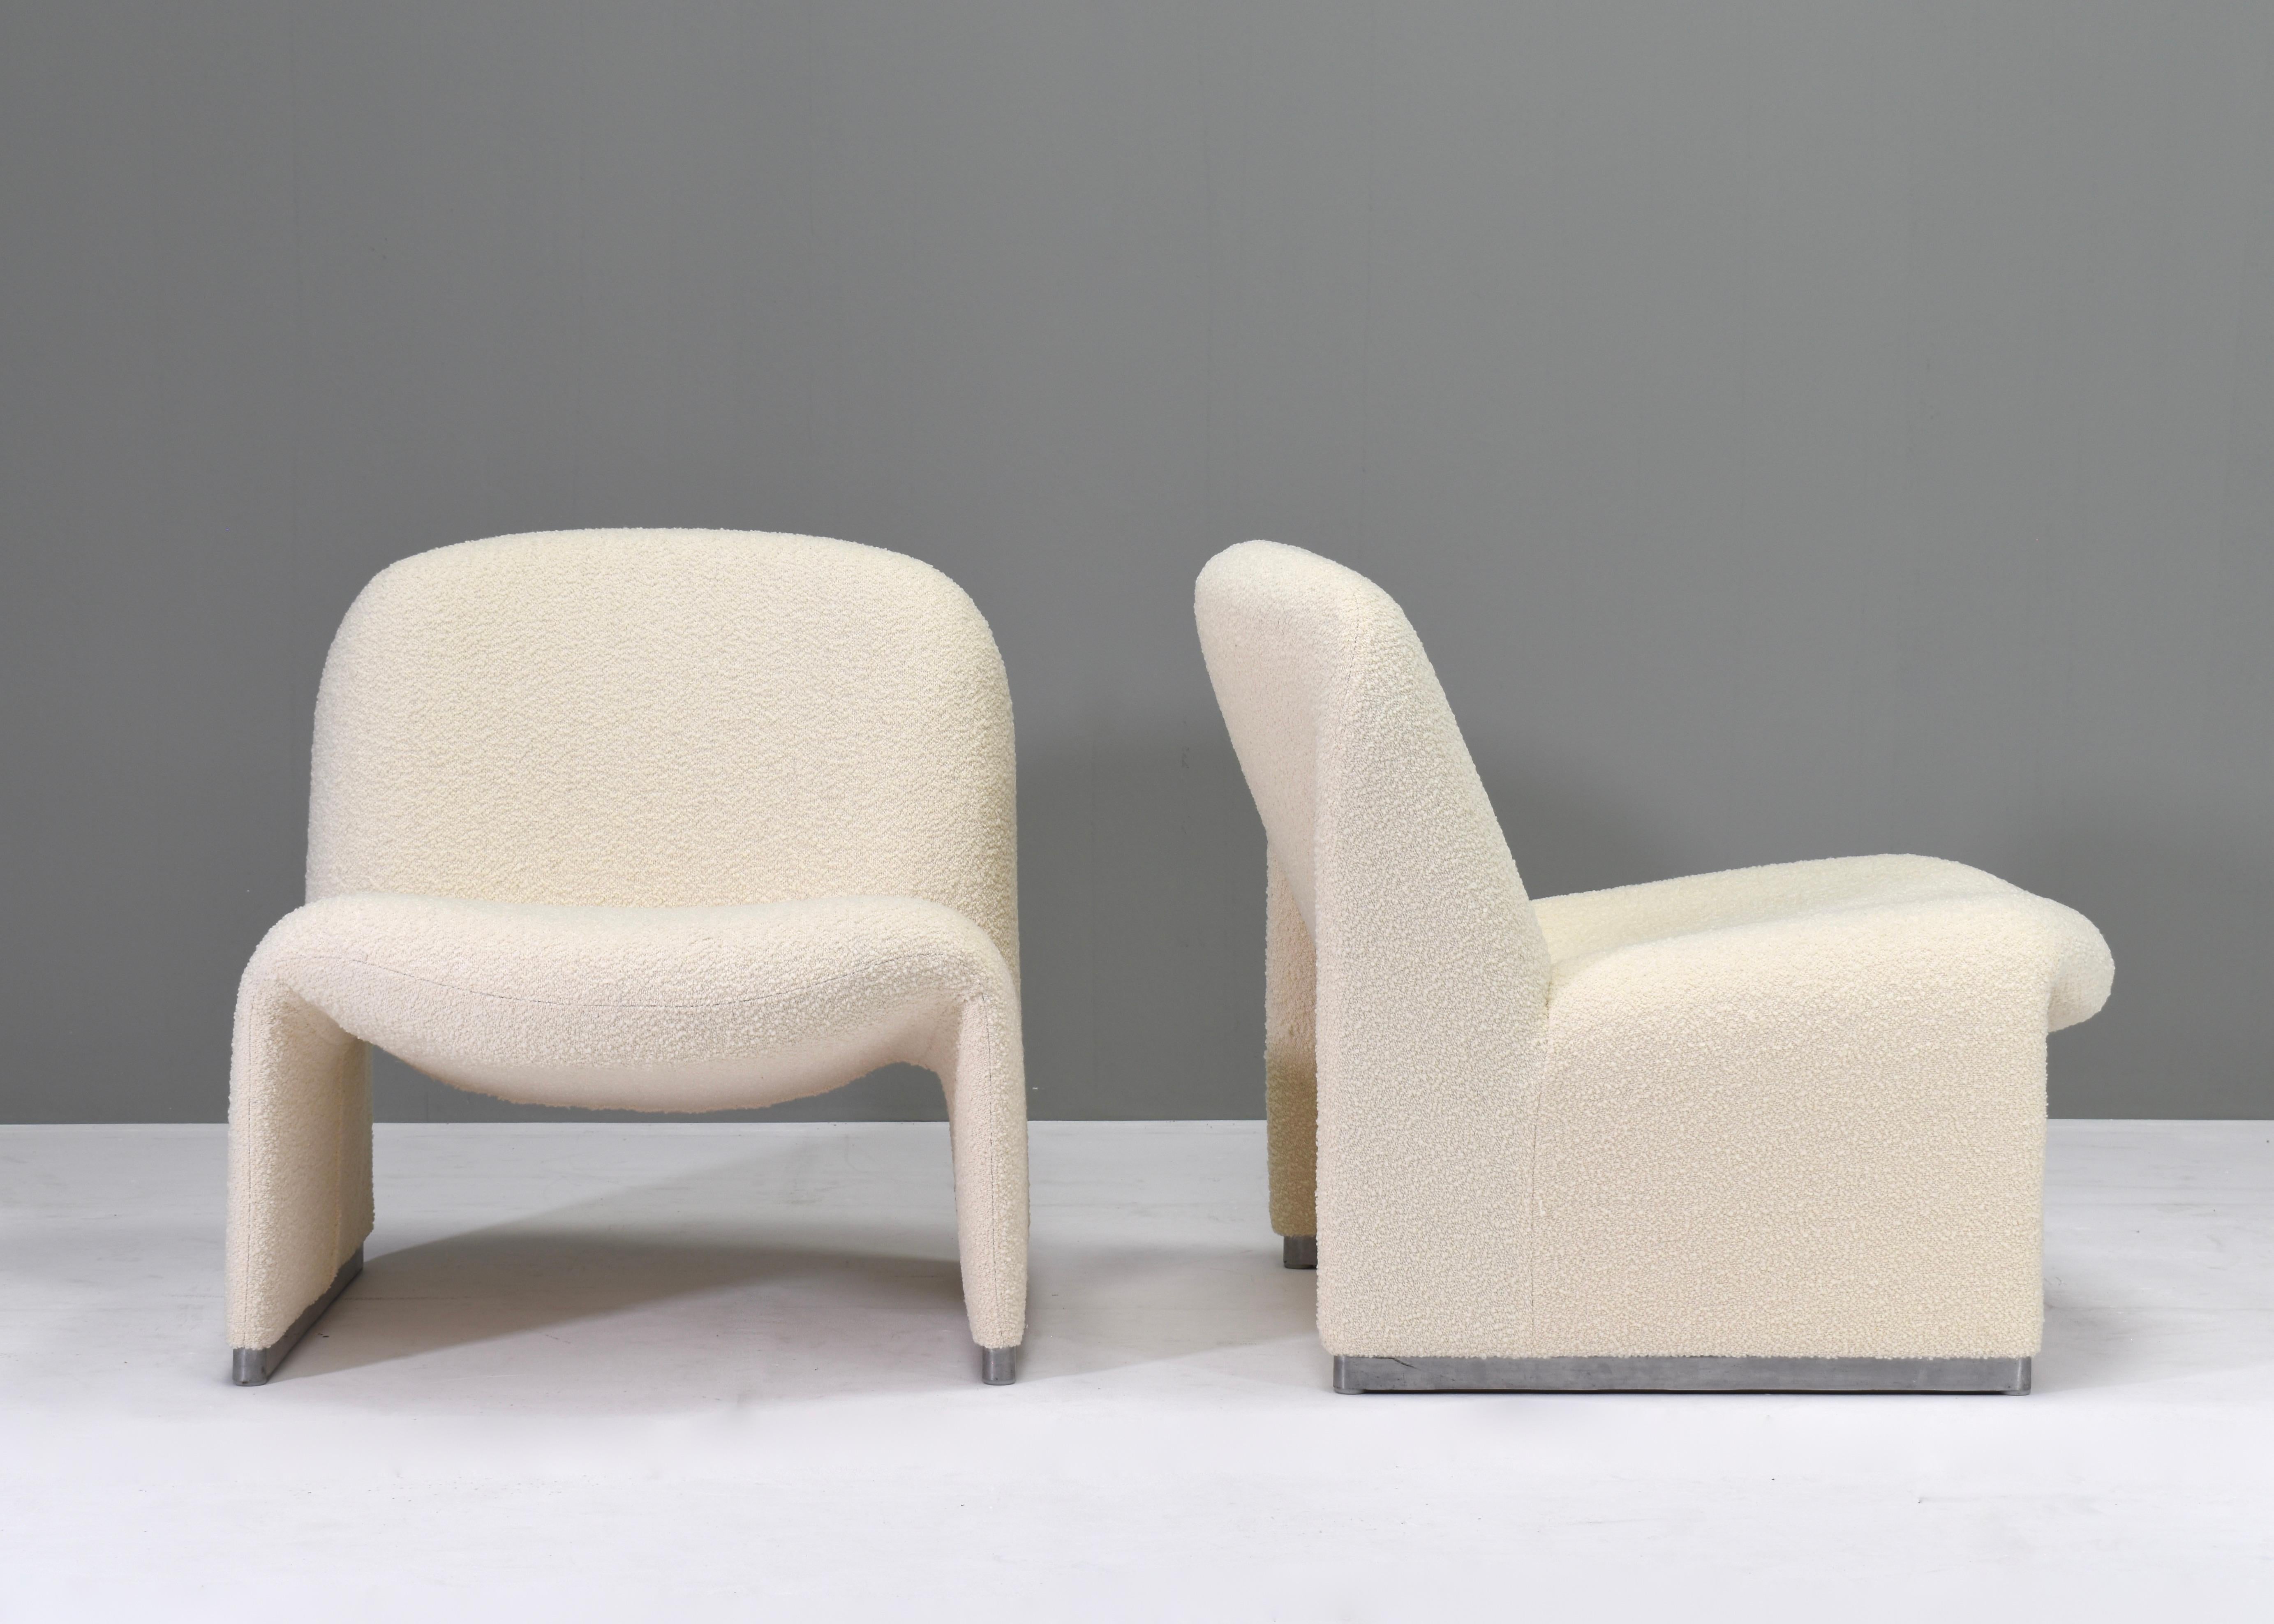 Italian Alky Chairs by Giancarlo Piretti for Castelli New Upholstery, Italy, circa 1970